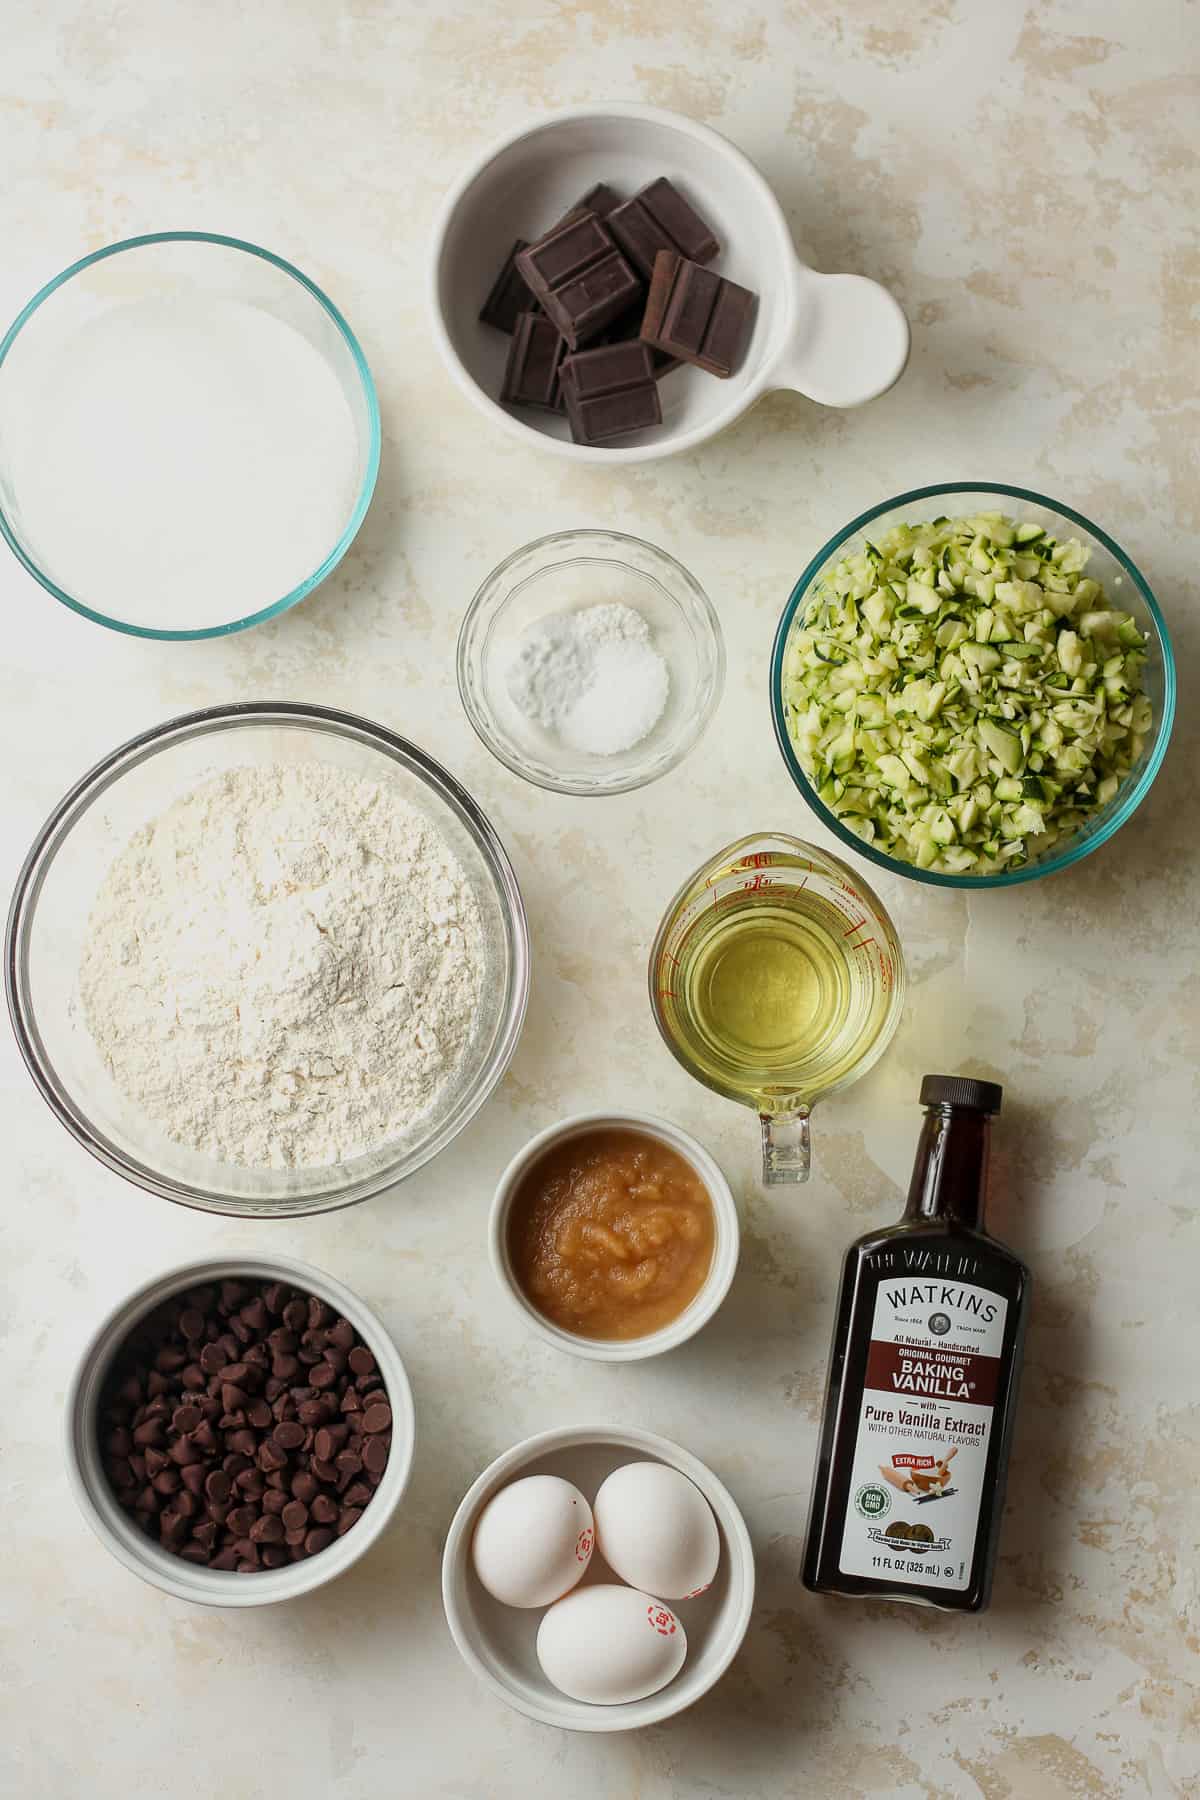 The ingredients for chocolate zucchini muffins in small bowls.